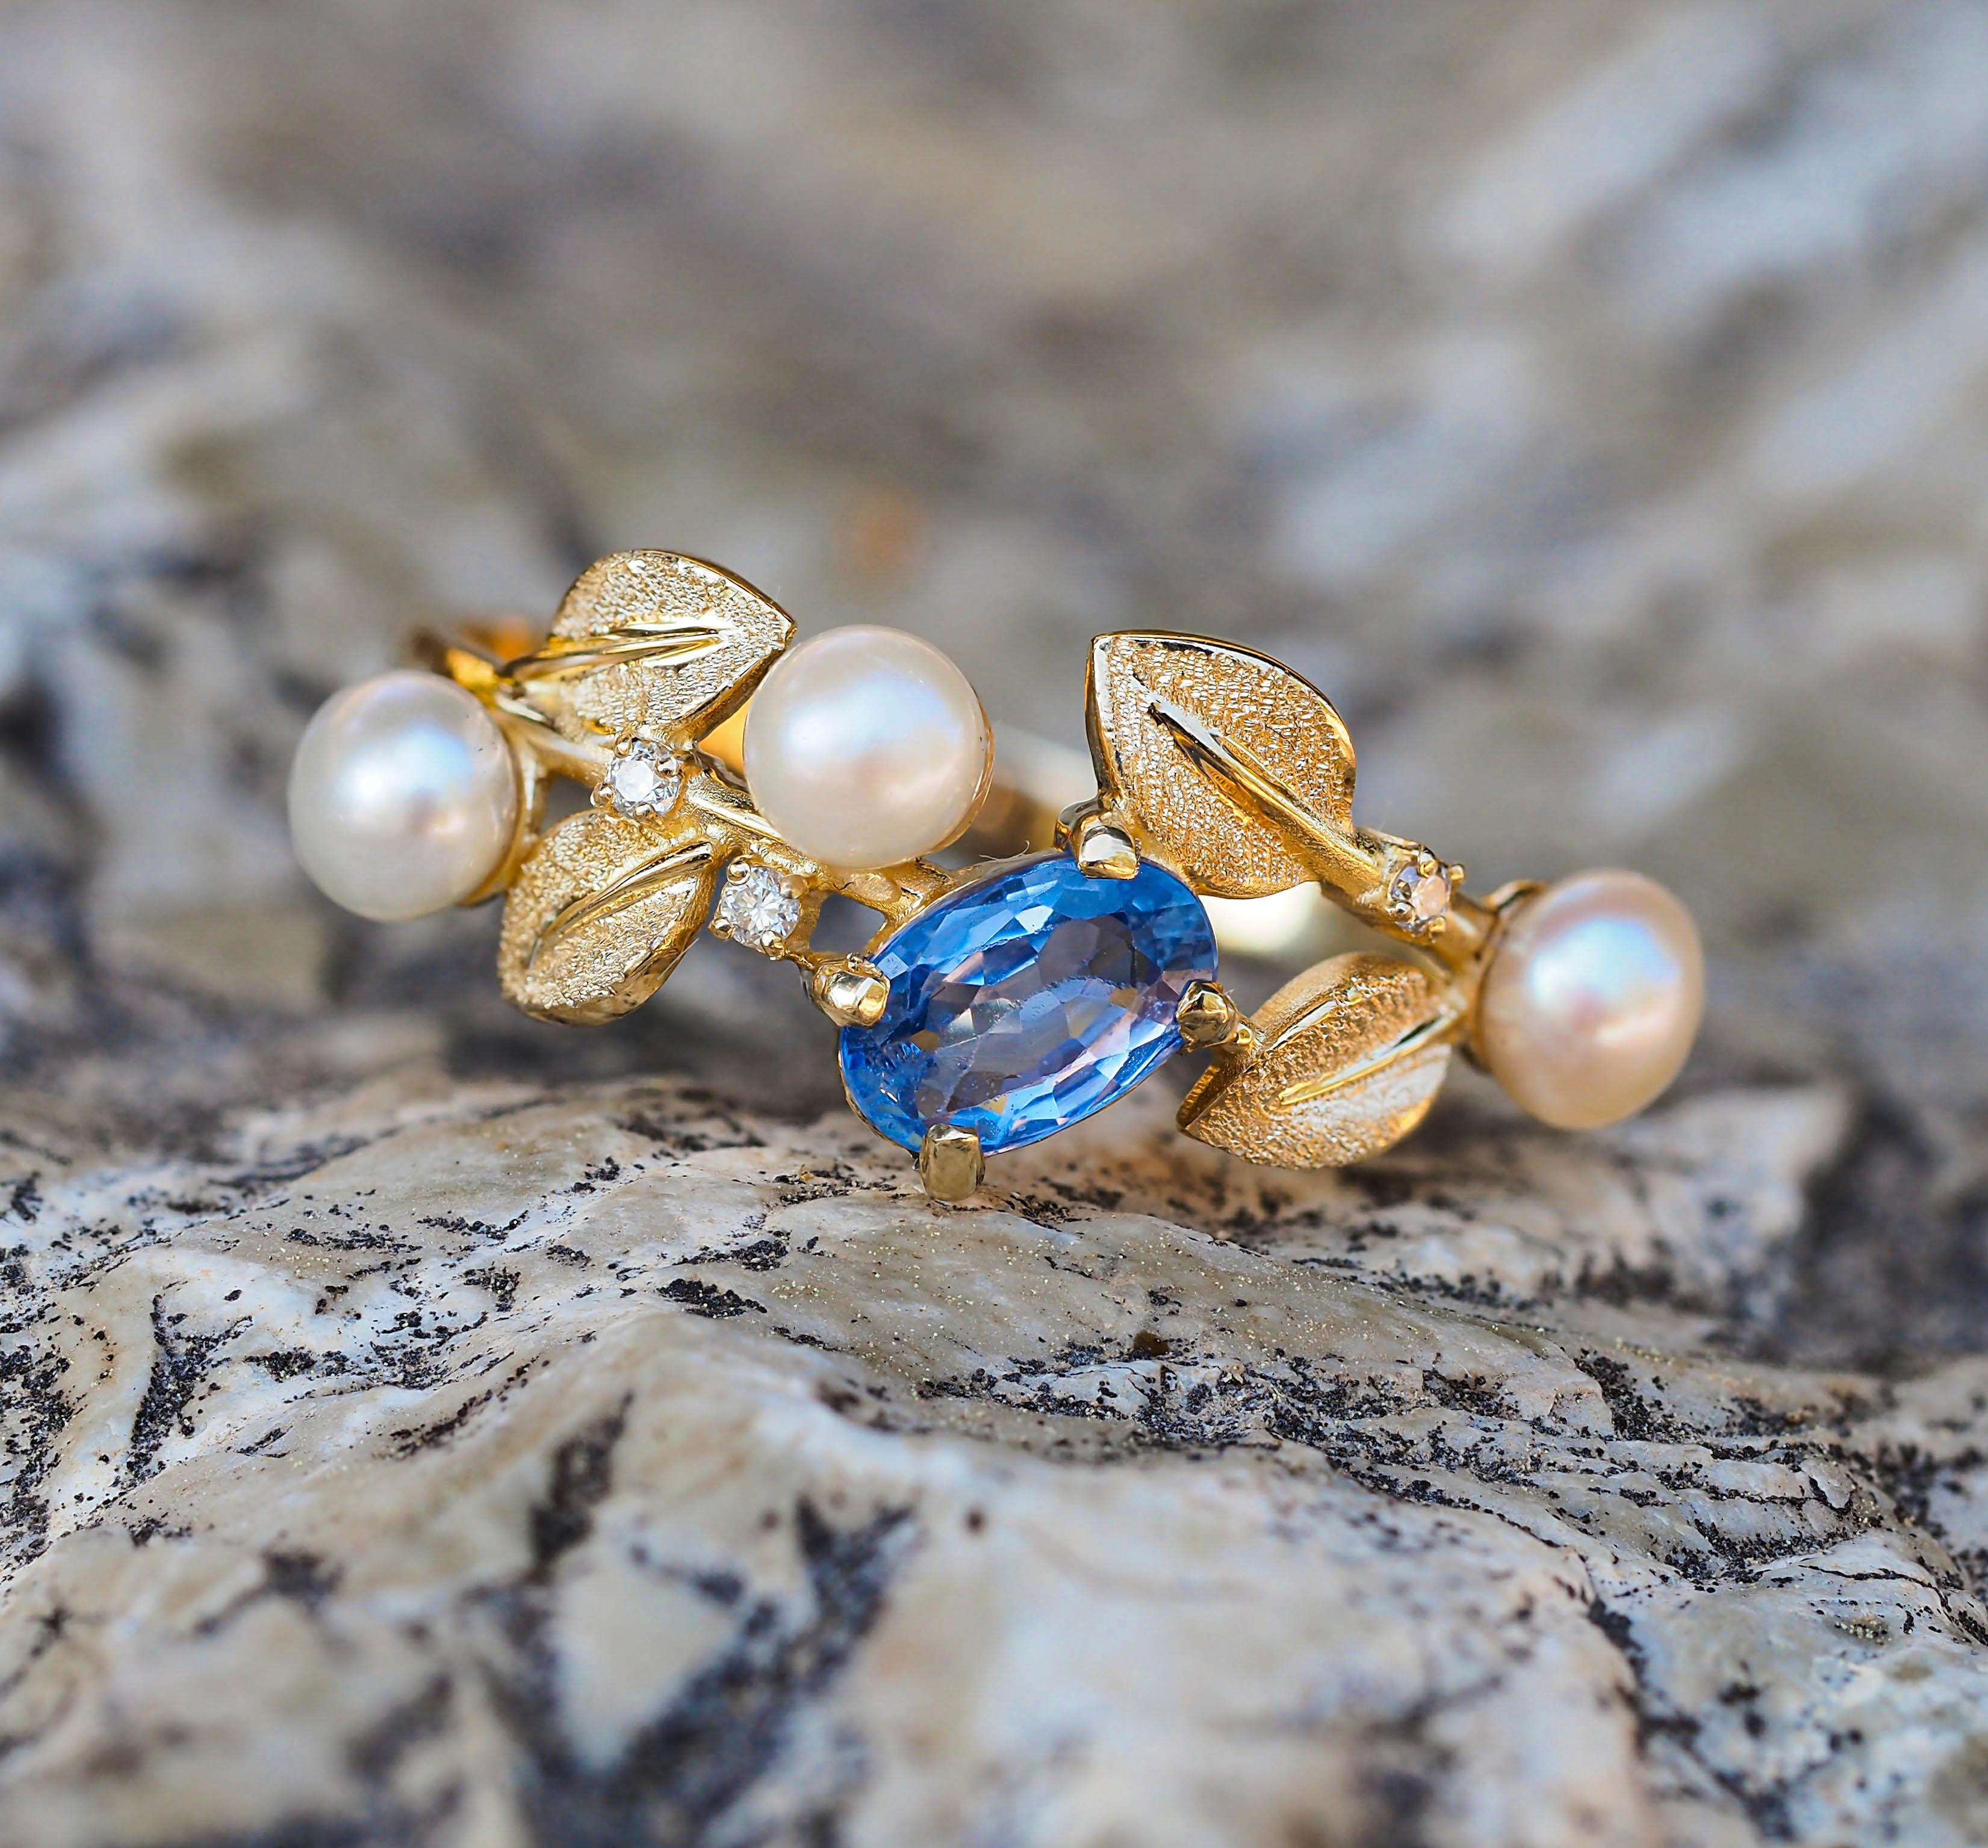 For Sale:  14k Gold Floral Ring with Sapphire, Diamonds and Pearls 9